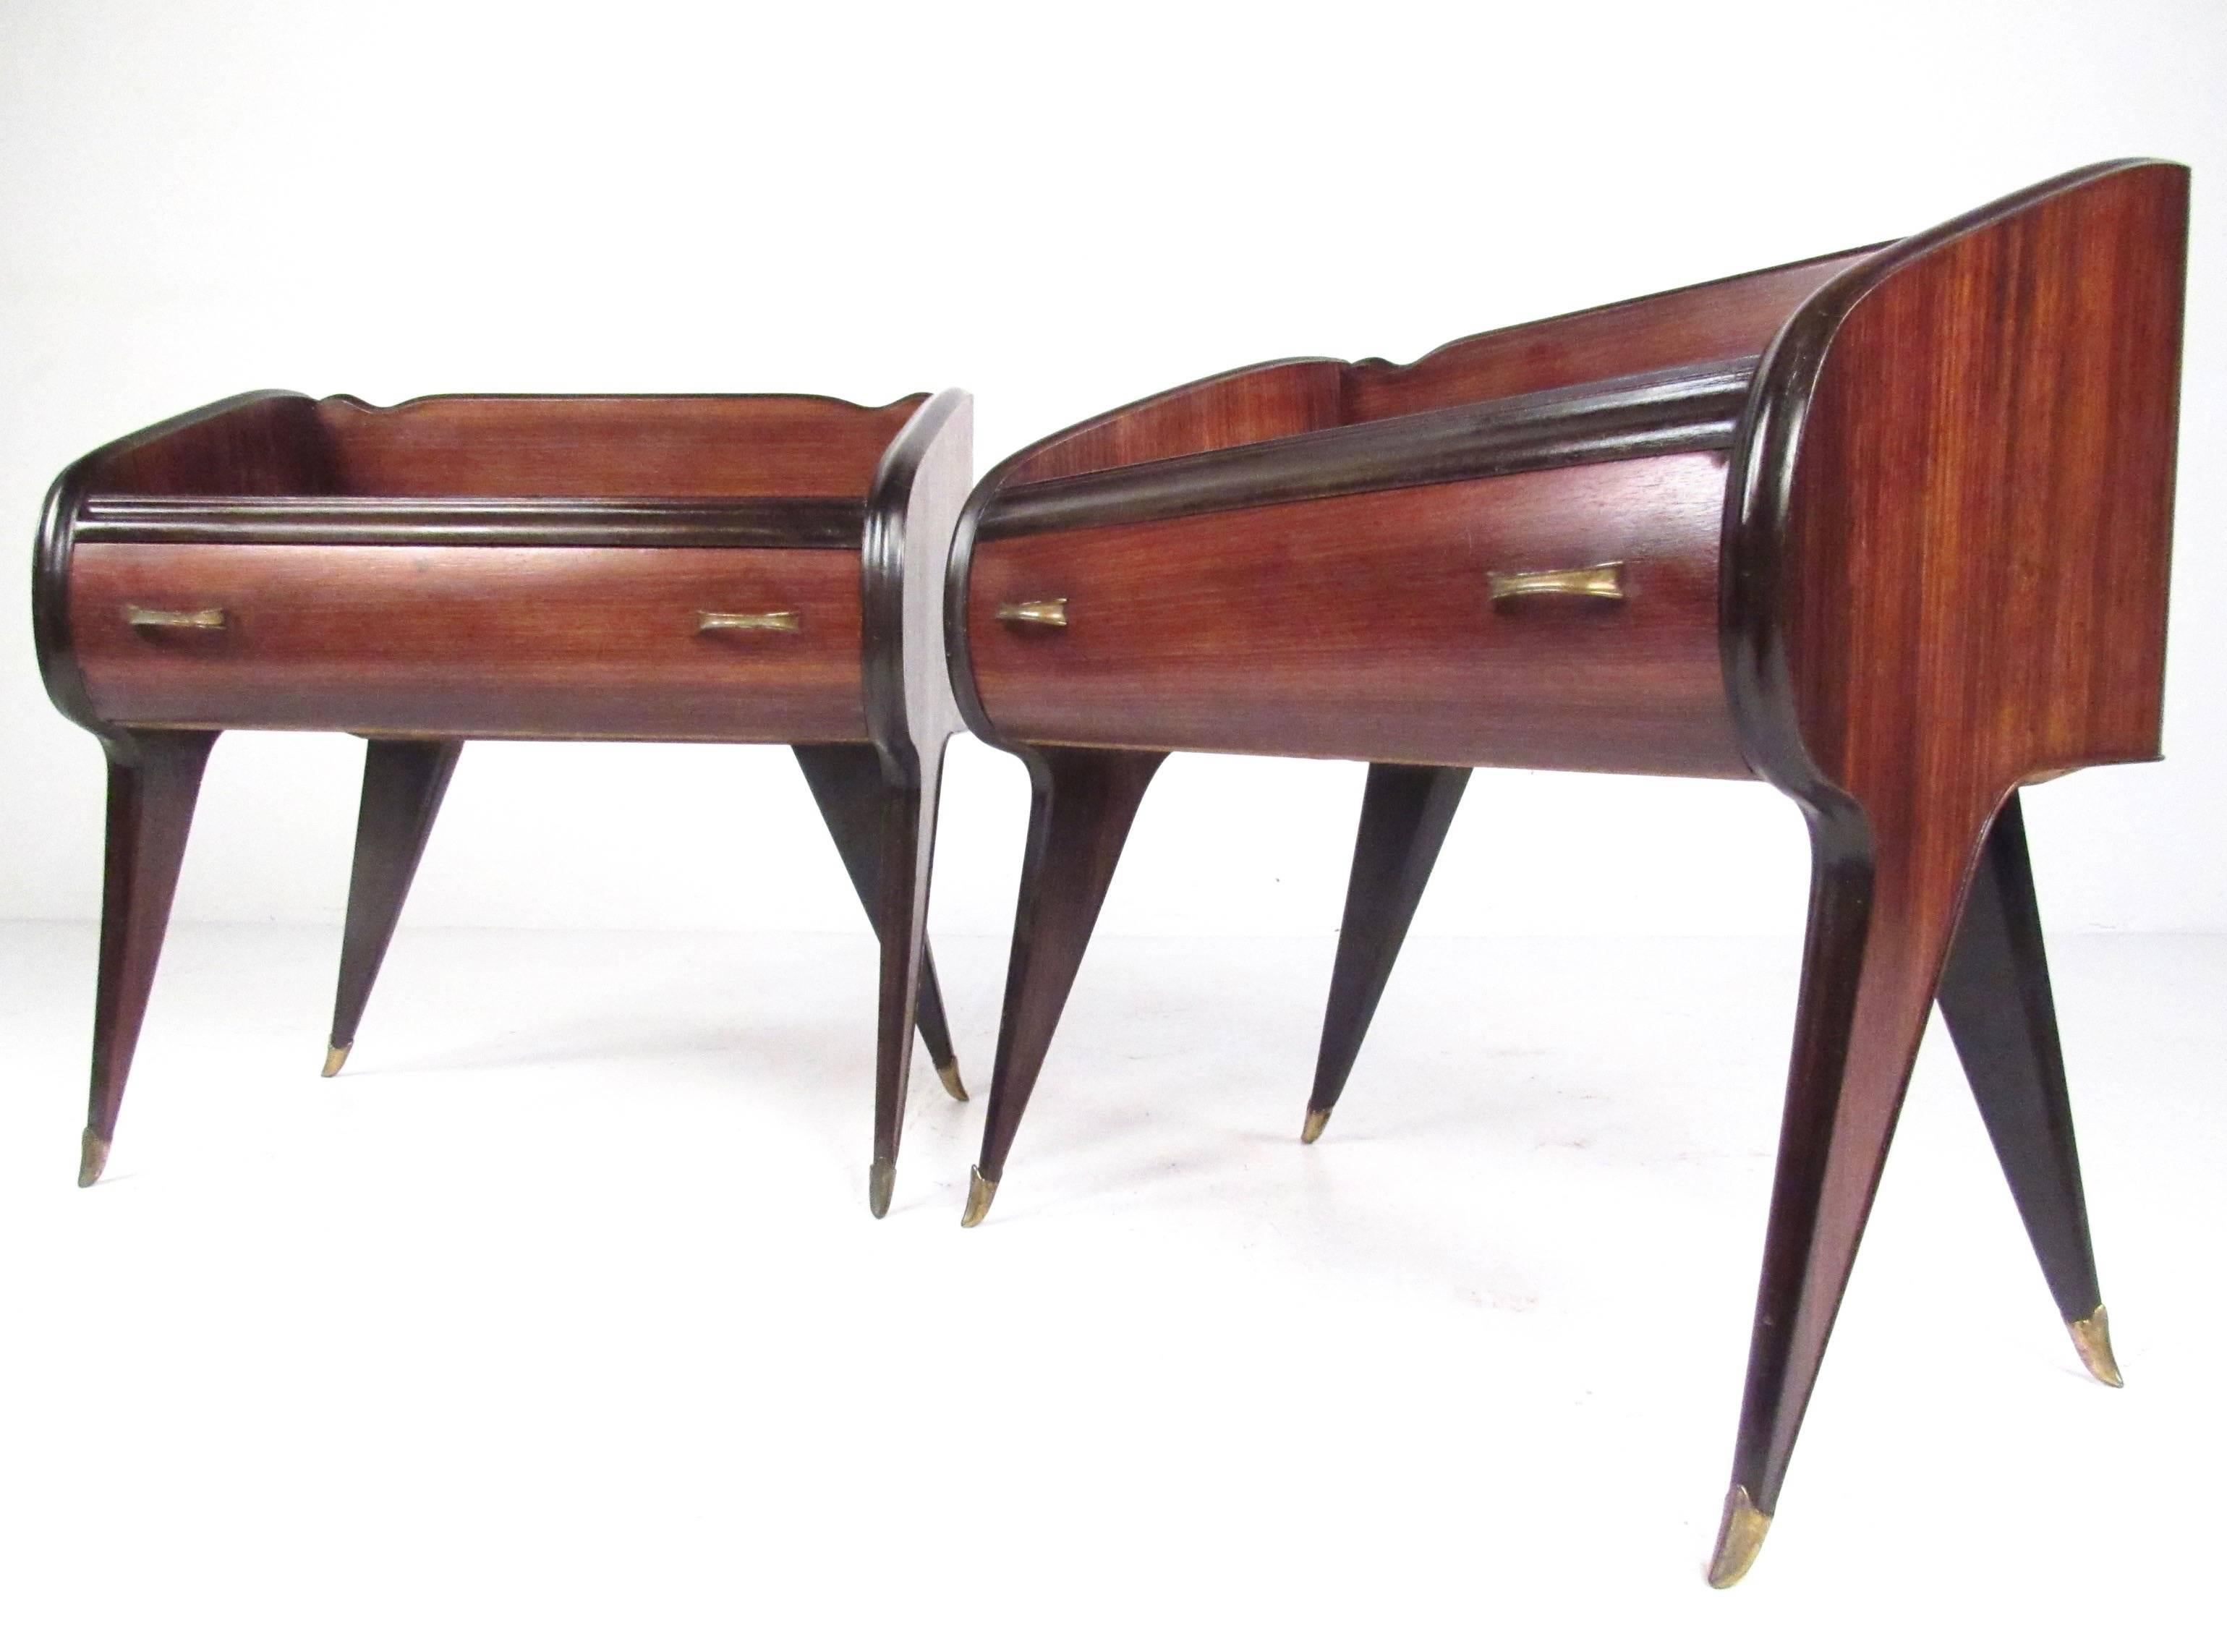 This exquisite pair of Italian modern end tables feature stylish sculpted teak design, brass details, and a dovetailed drawer for extra storage. Unique Mid-Century design makes these an impressive addition to any setting. Please confirm item